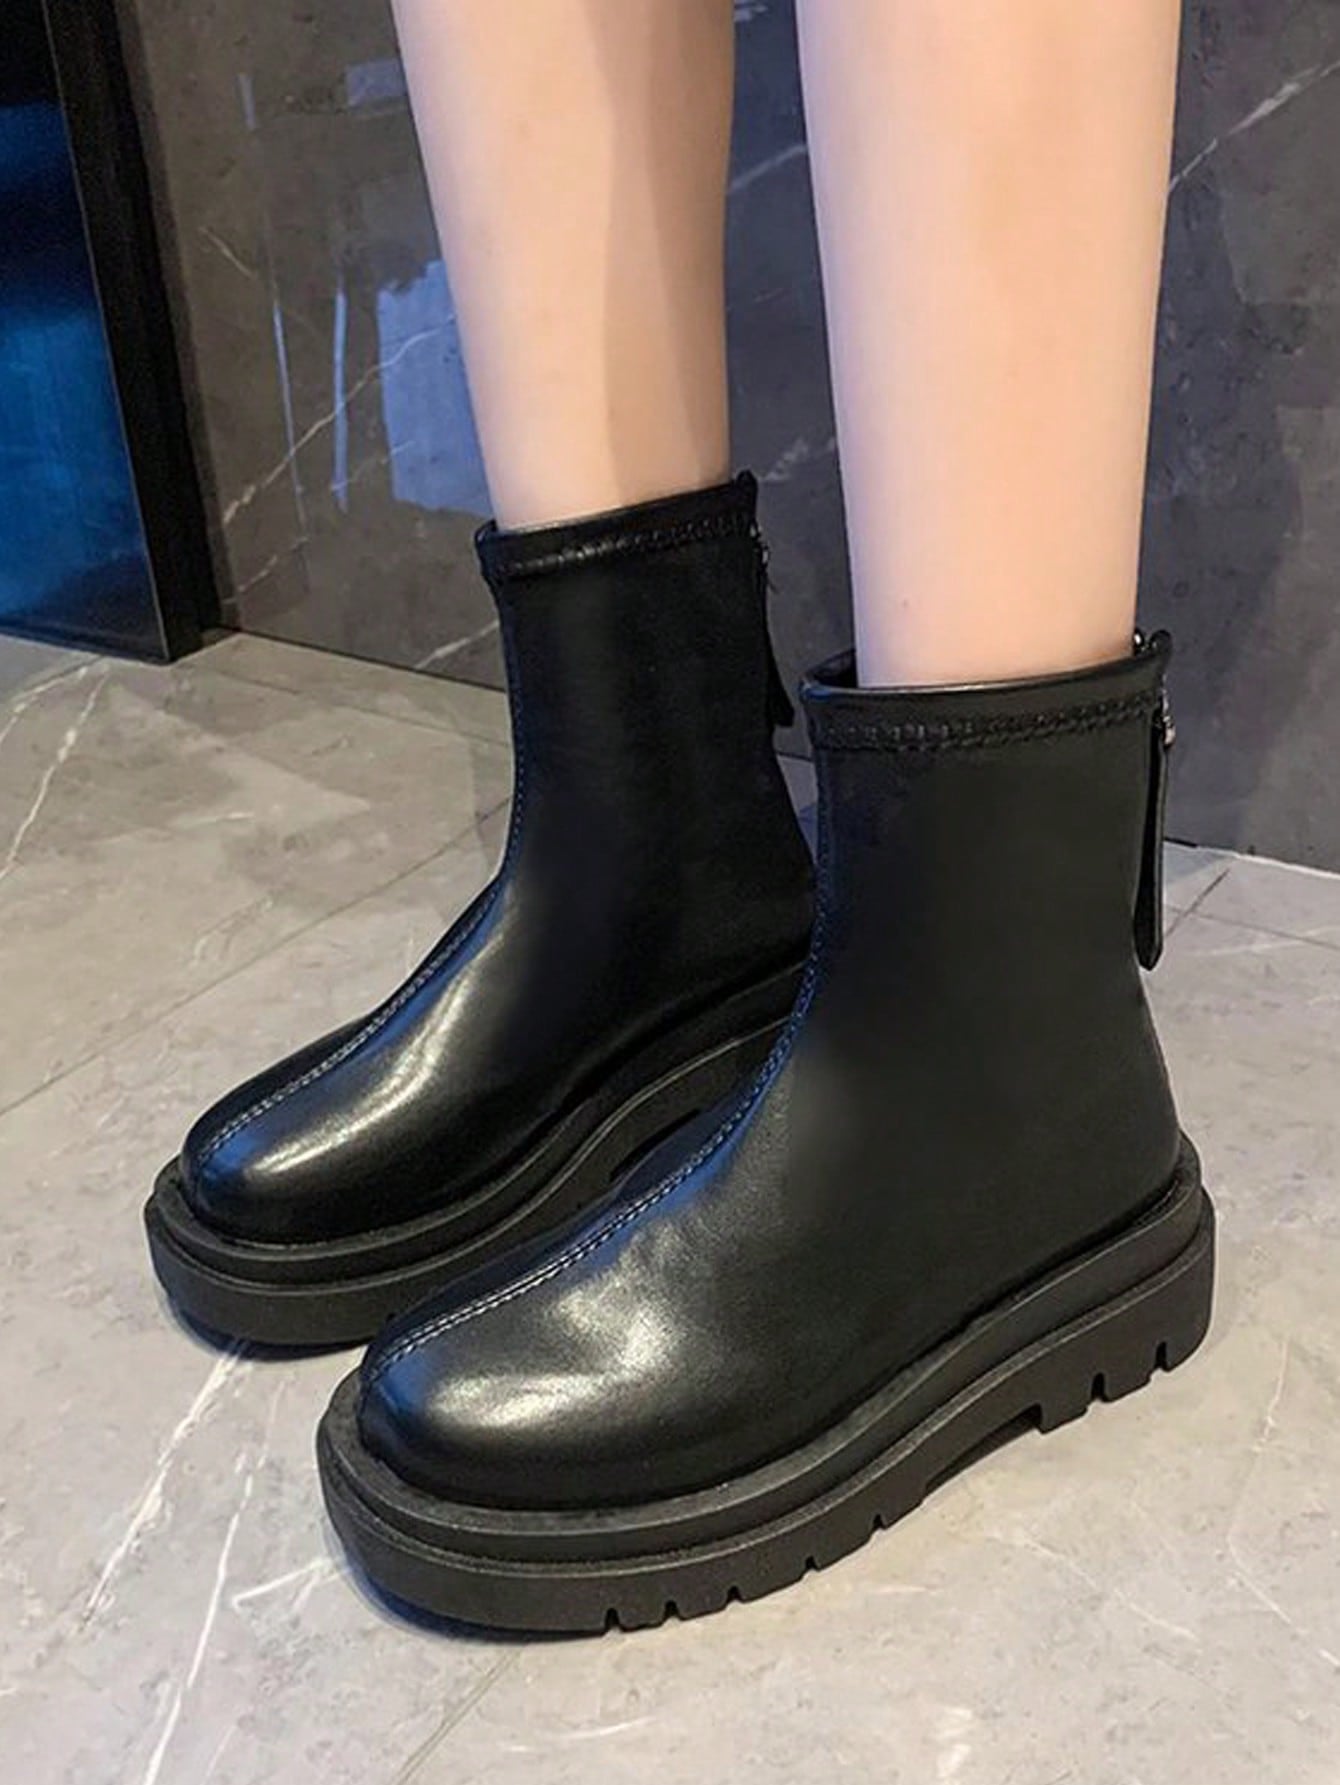 2023 New Autumn And Winter Fashion Women's Short Boots With Thick Sole, Slim Heel, And Chunky Style-Black-1